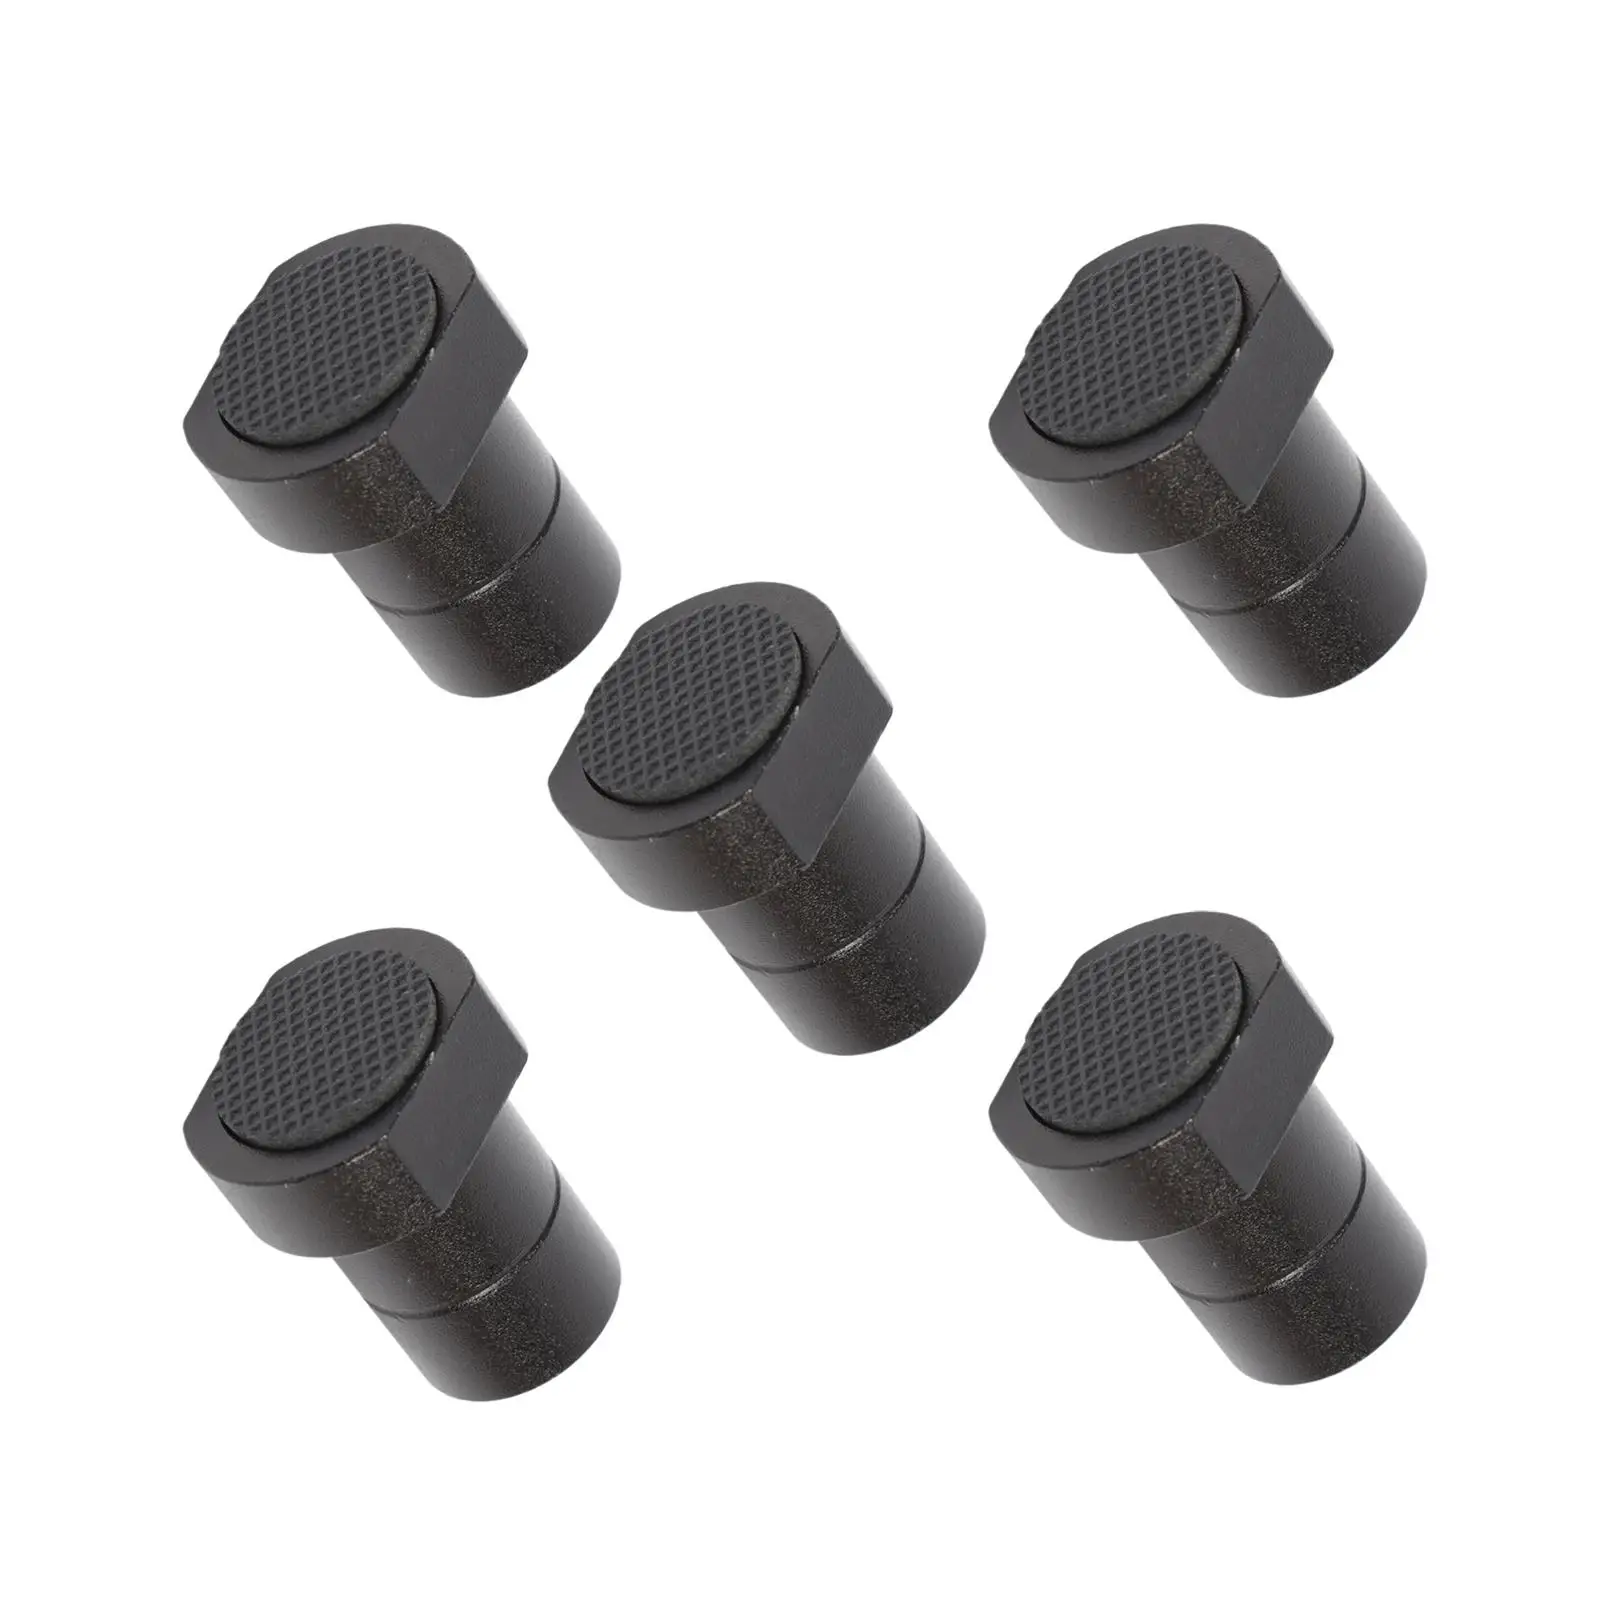 5 Pieces Woodworking Bench Dogs Workbench Peg Stoppers Table Clamp Workbench Peg Brake Stops